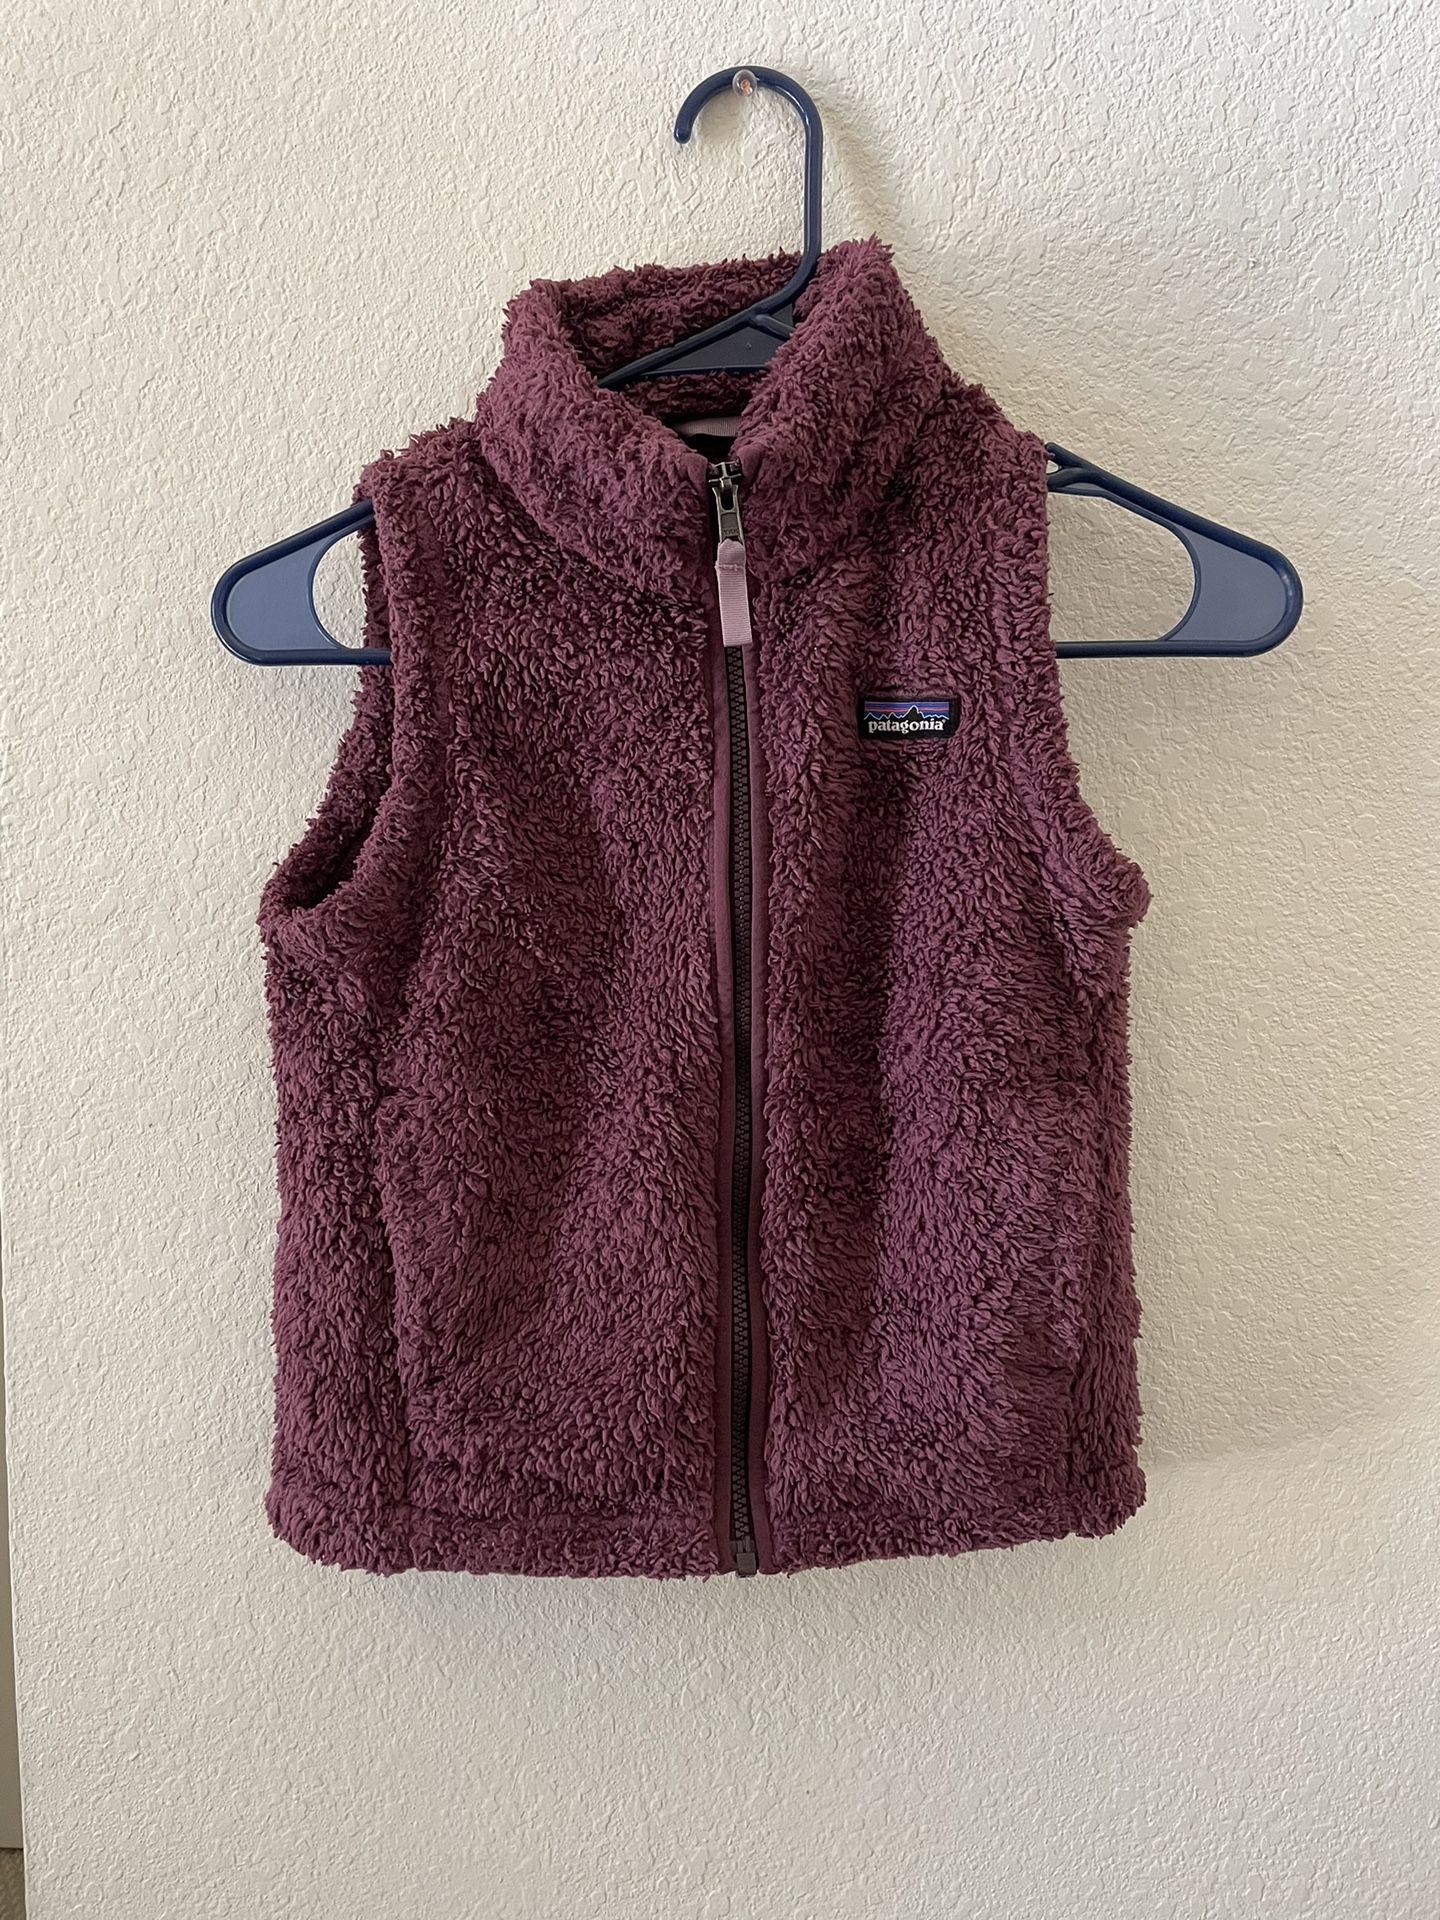 Patagonia Vest Youth Small